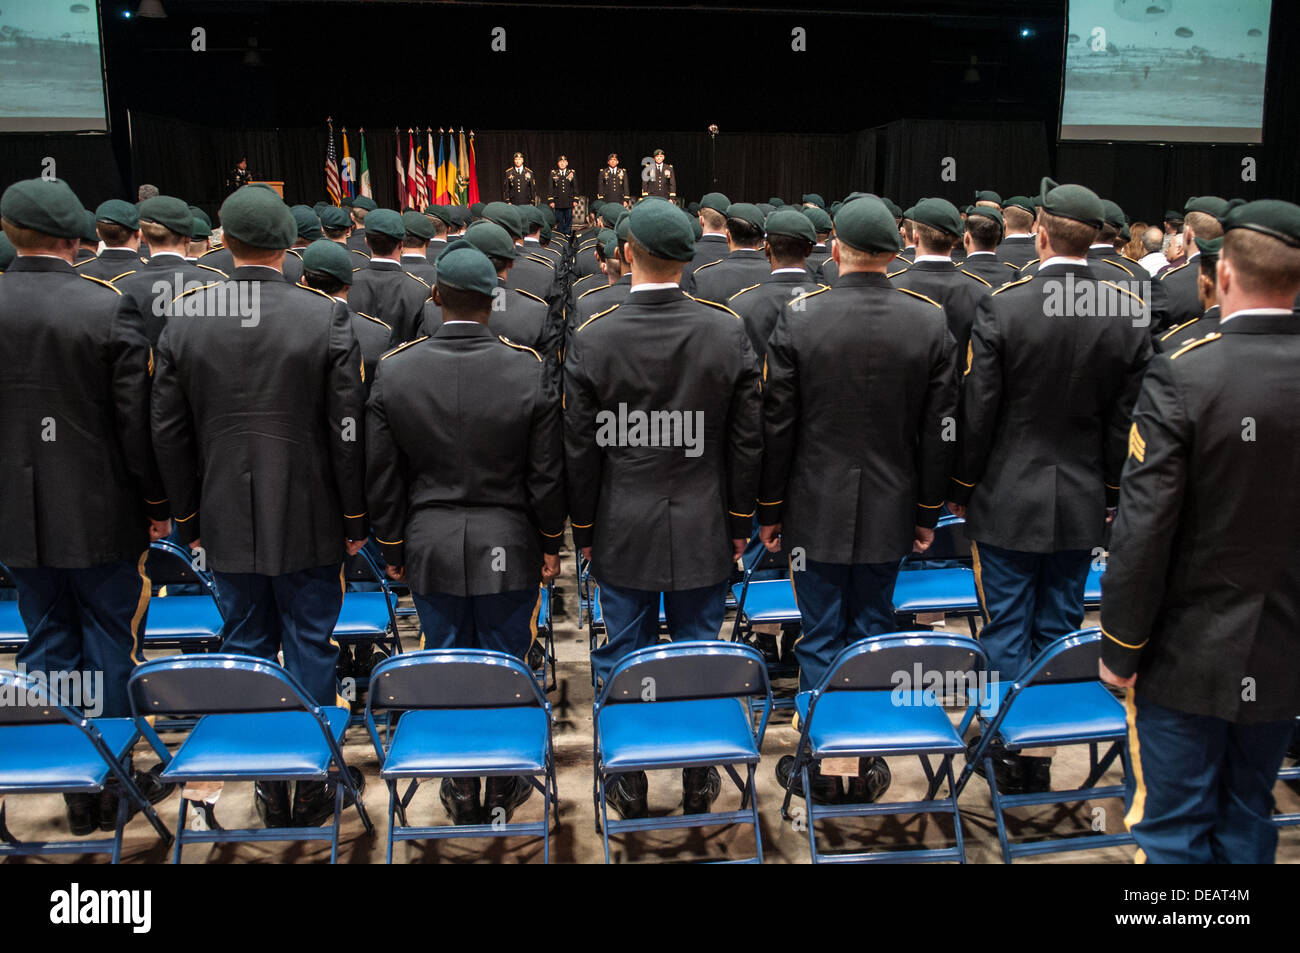 August 1, 2013 - Raleigh, North Carolina, U.S. - U.S. Army Green Beret soldiers wear their green berets for the first time at the Cumberland County Coliseum in Fayetteville, N.C. during the U.S. Army Special Forces Qualification Course graduation ceremony, Aug. 1, 2013. The soldiers of Class 277 endured nearly two years of intense training to become members of the Army's elite unconventional warfare force who will operate on operational detachment teams around the world. (Credit Image: © Timothy L. Hale/ZUMAPRESS.com) Stock Photo